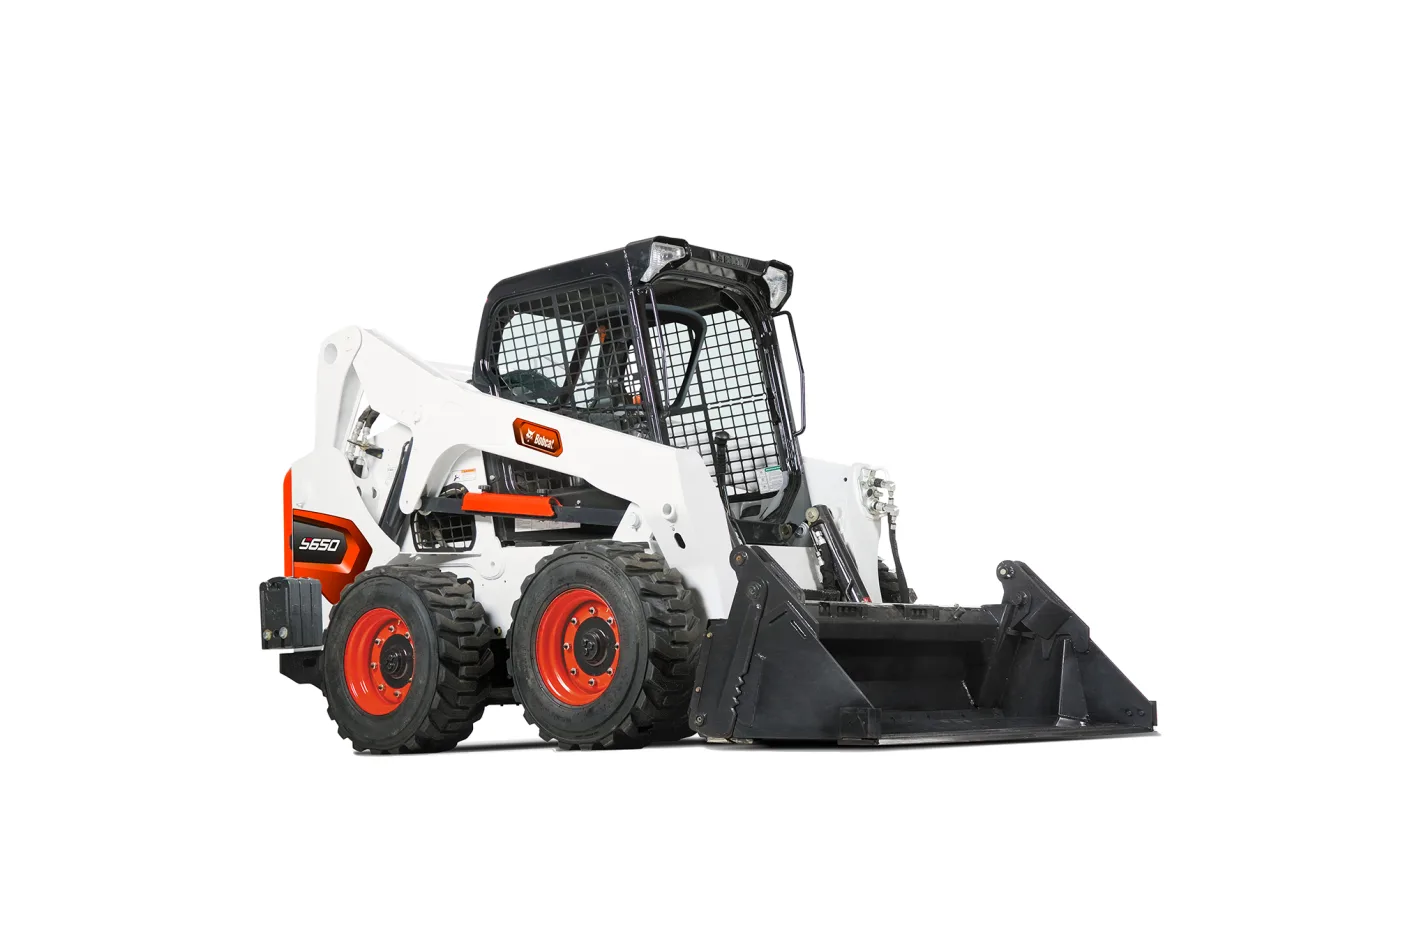 Browse Specs and more for the Bobcat S650 Skid-Steer Loader - White Star Machinery